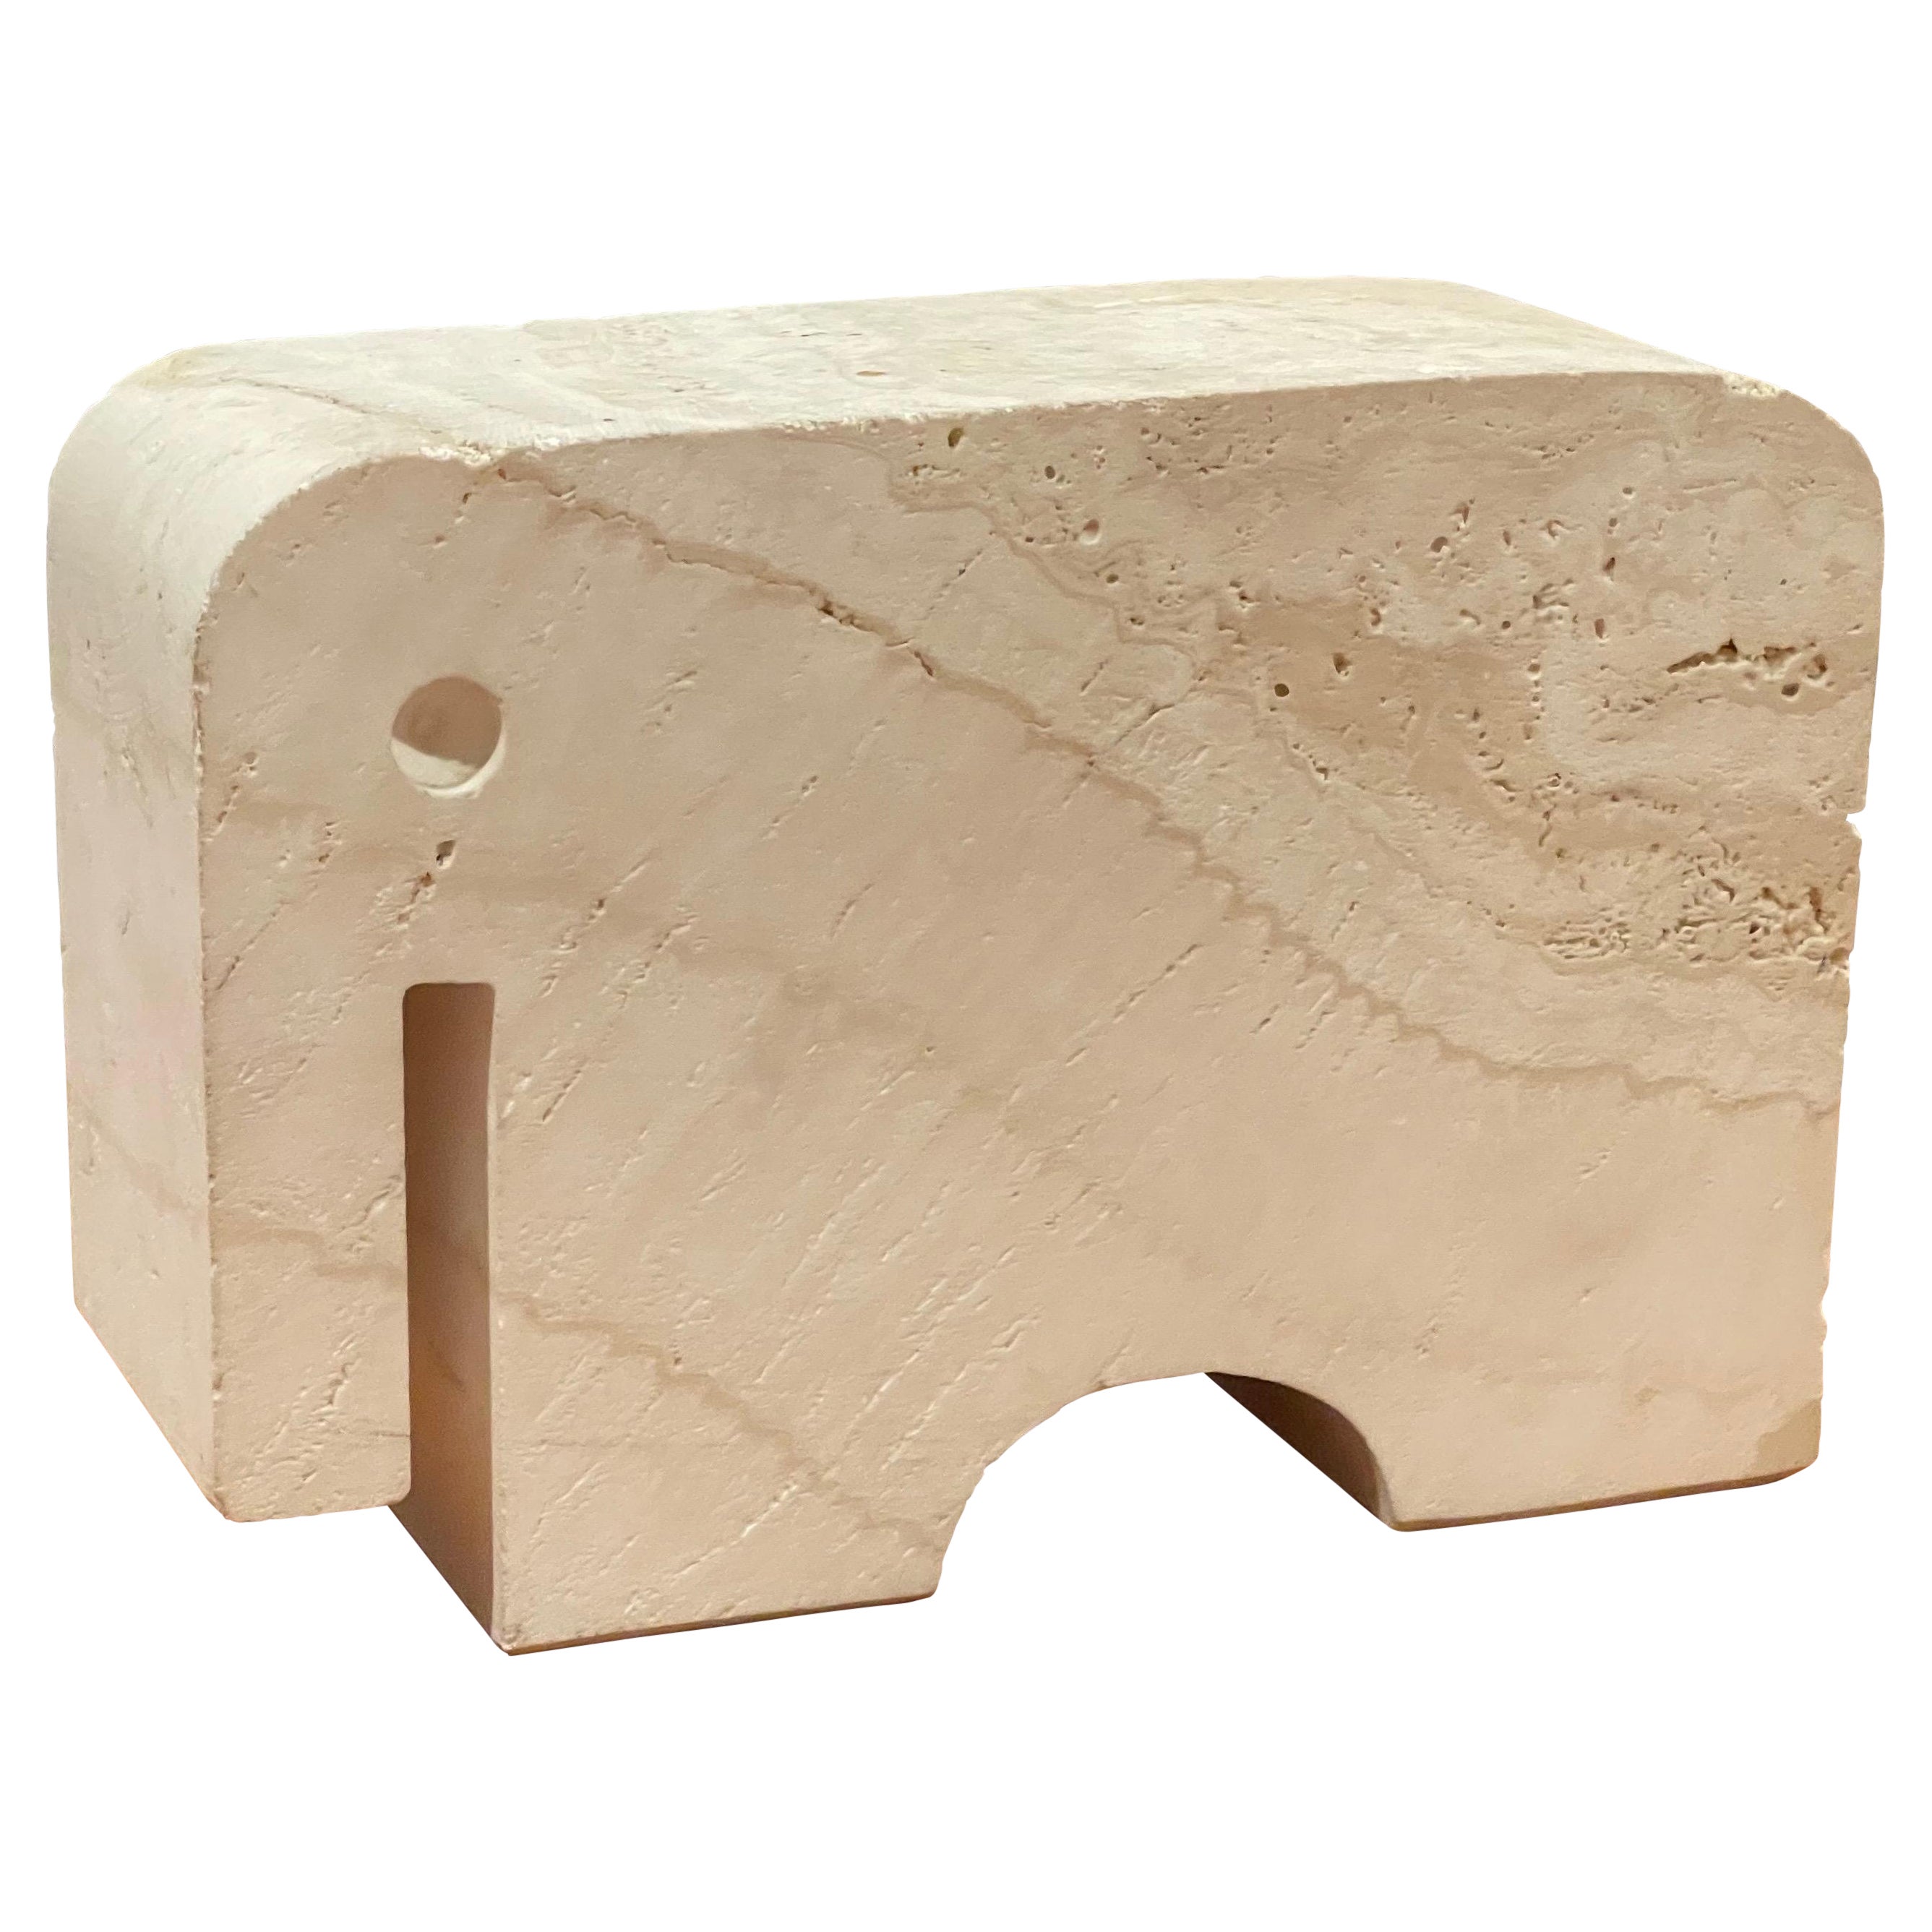 Midcentury Travertine Elephant Sculpture / Bookend by Fratelli Mannelli For Sale